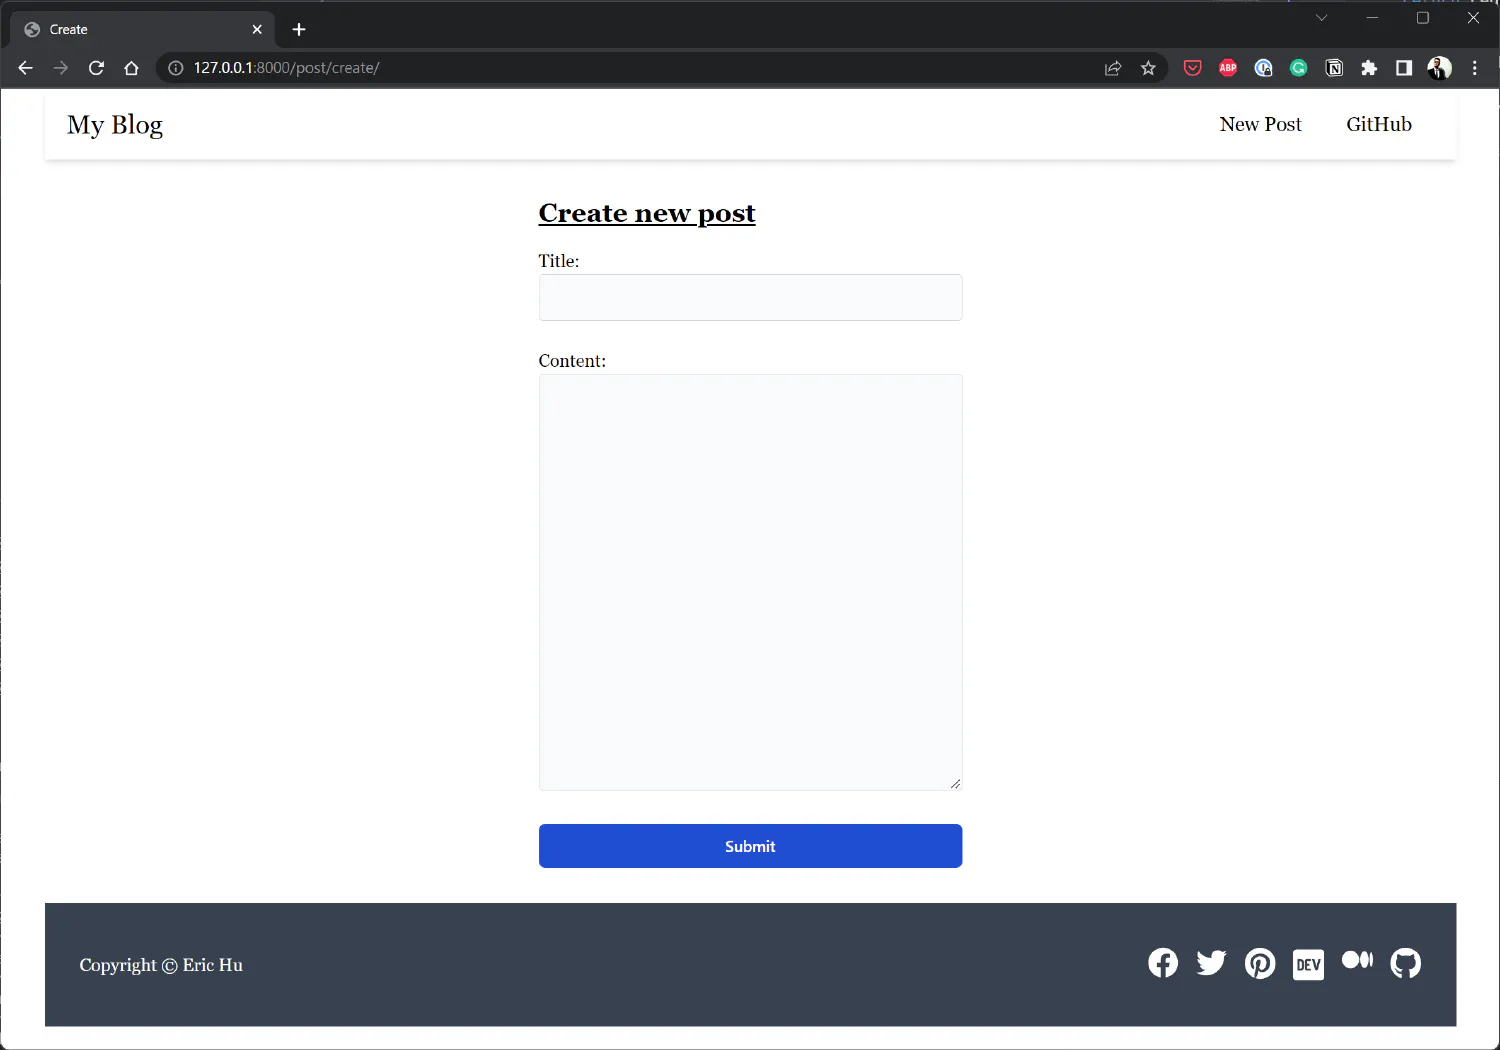 The create page